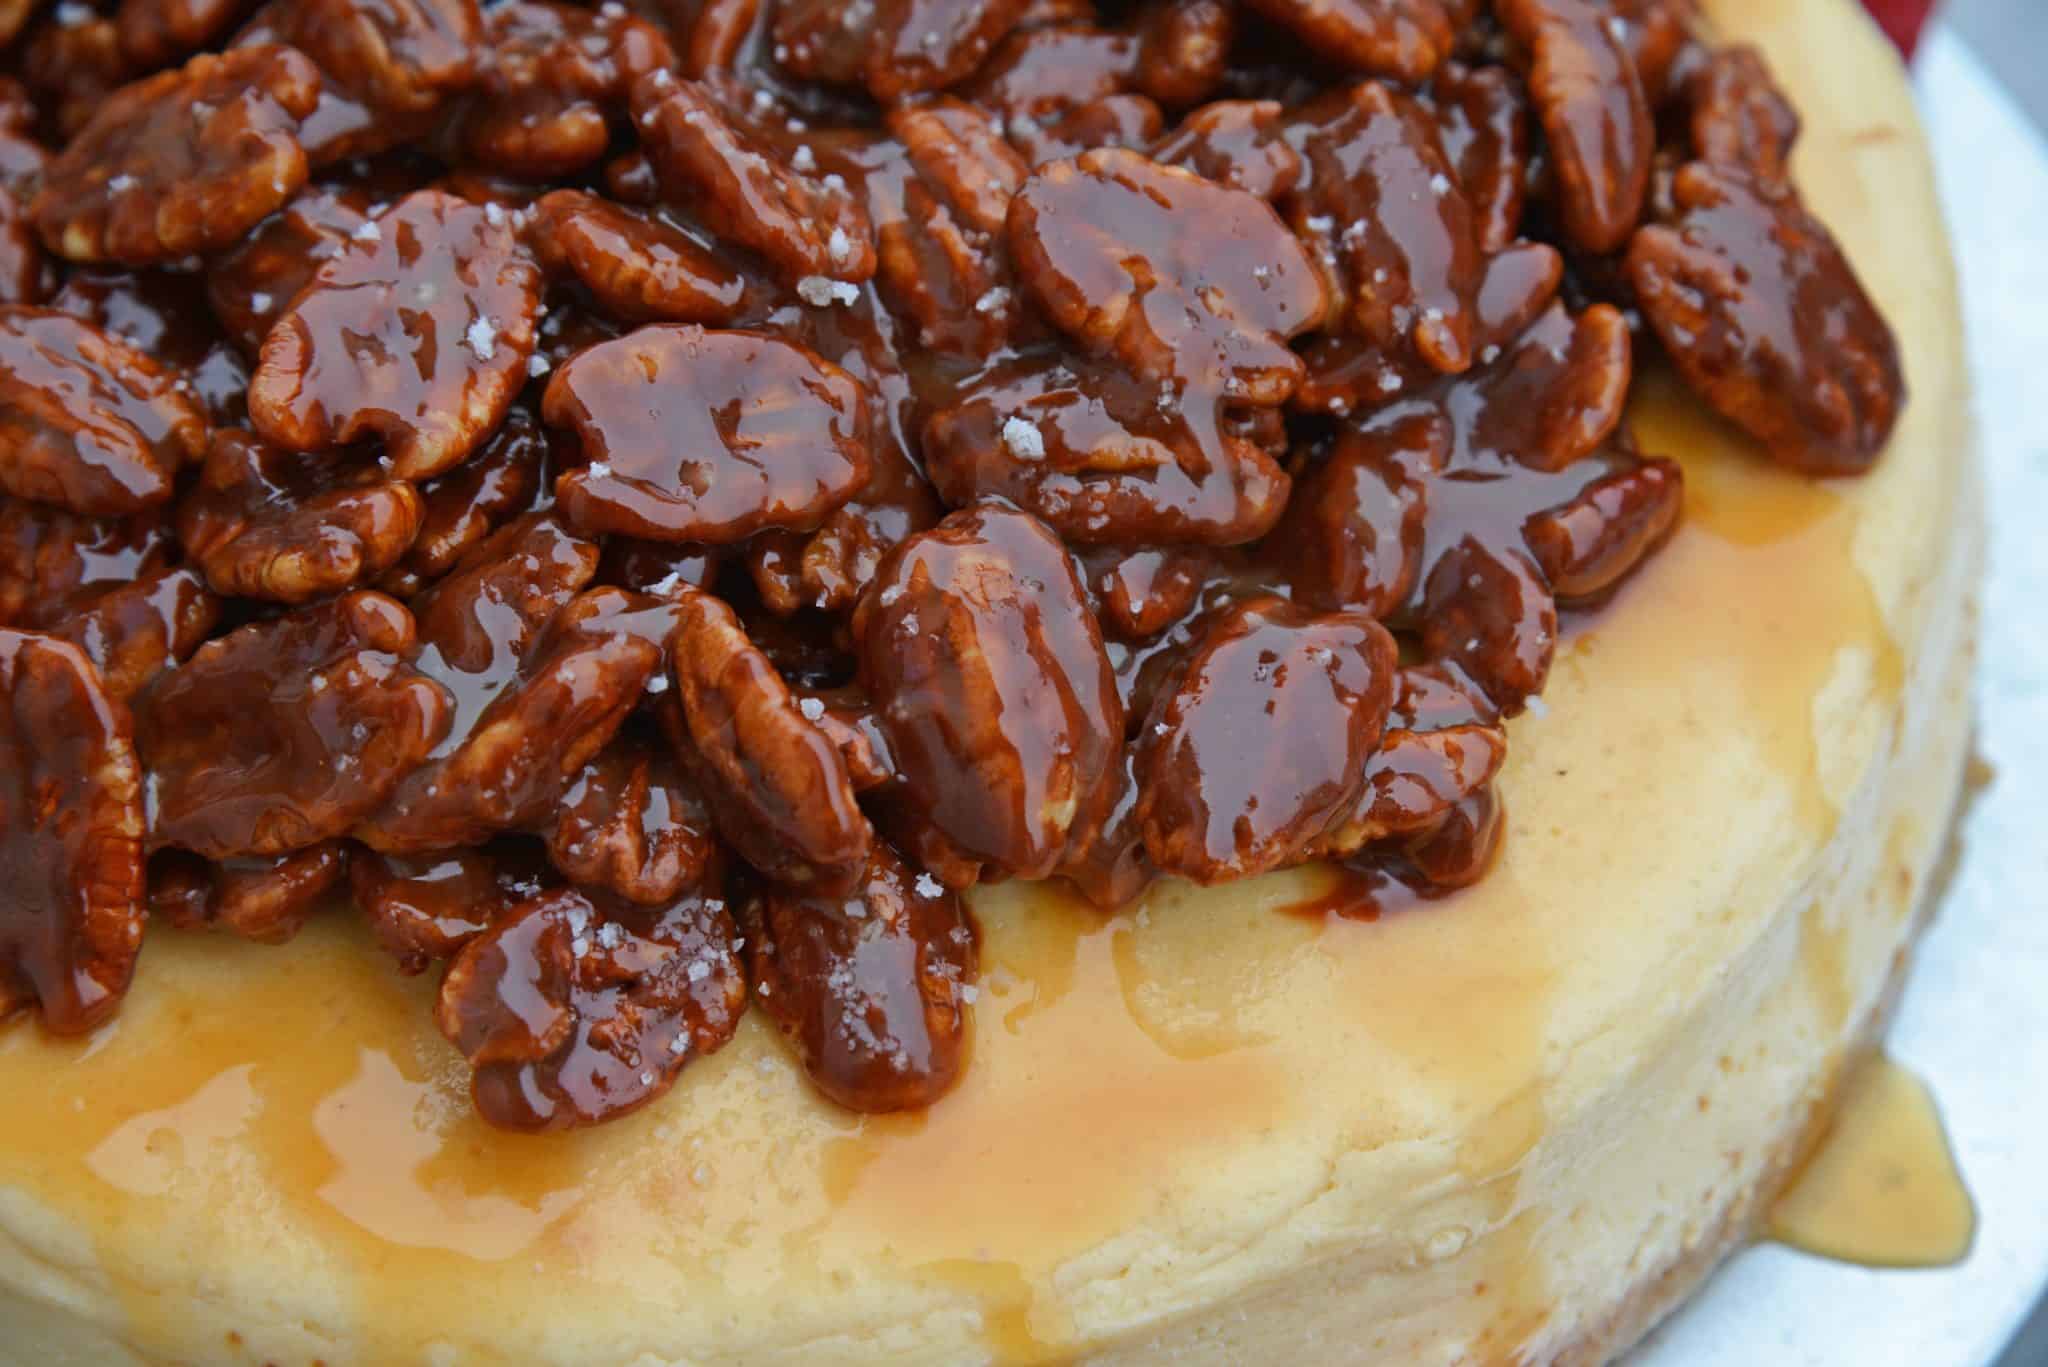 Pecan Pie Cheesecake is the perfect combination of two classic desserts - chocolate pecan pie and cheesecake. You'll want this on your holiday dessert menu! #chocolatepecanpie #pecanpiecheesecake #bestcheesecakerecipe www.savoryexperiments.com